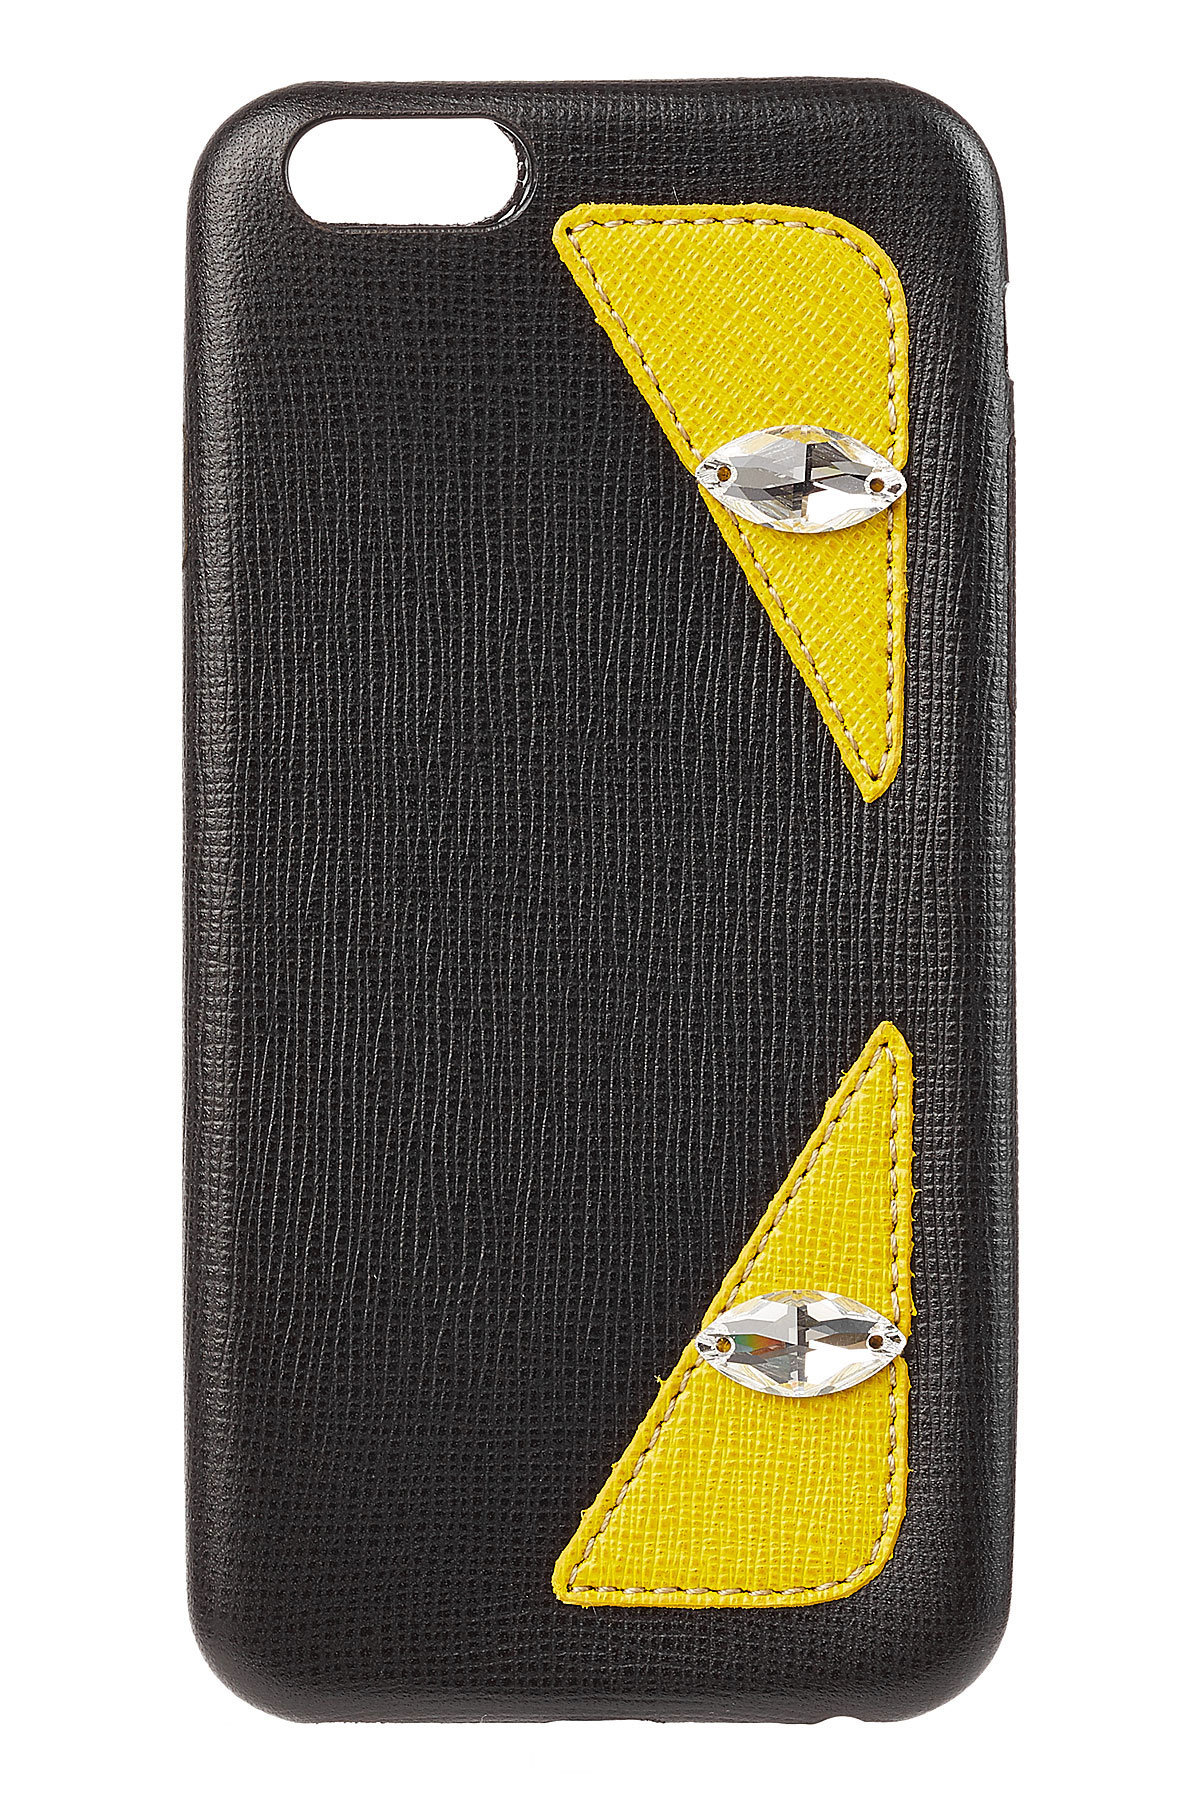 Fendi - iPhone Case for iPhone 6 and 6S